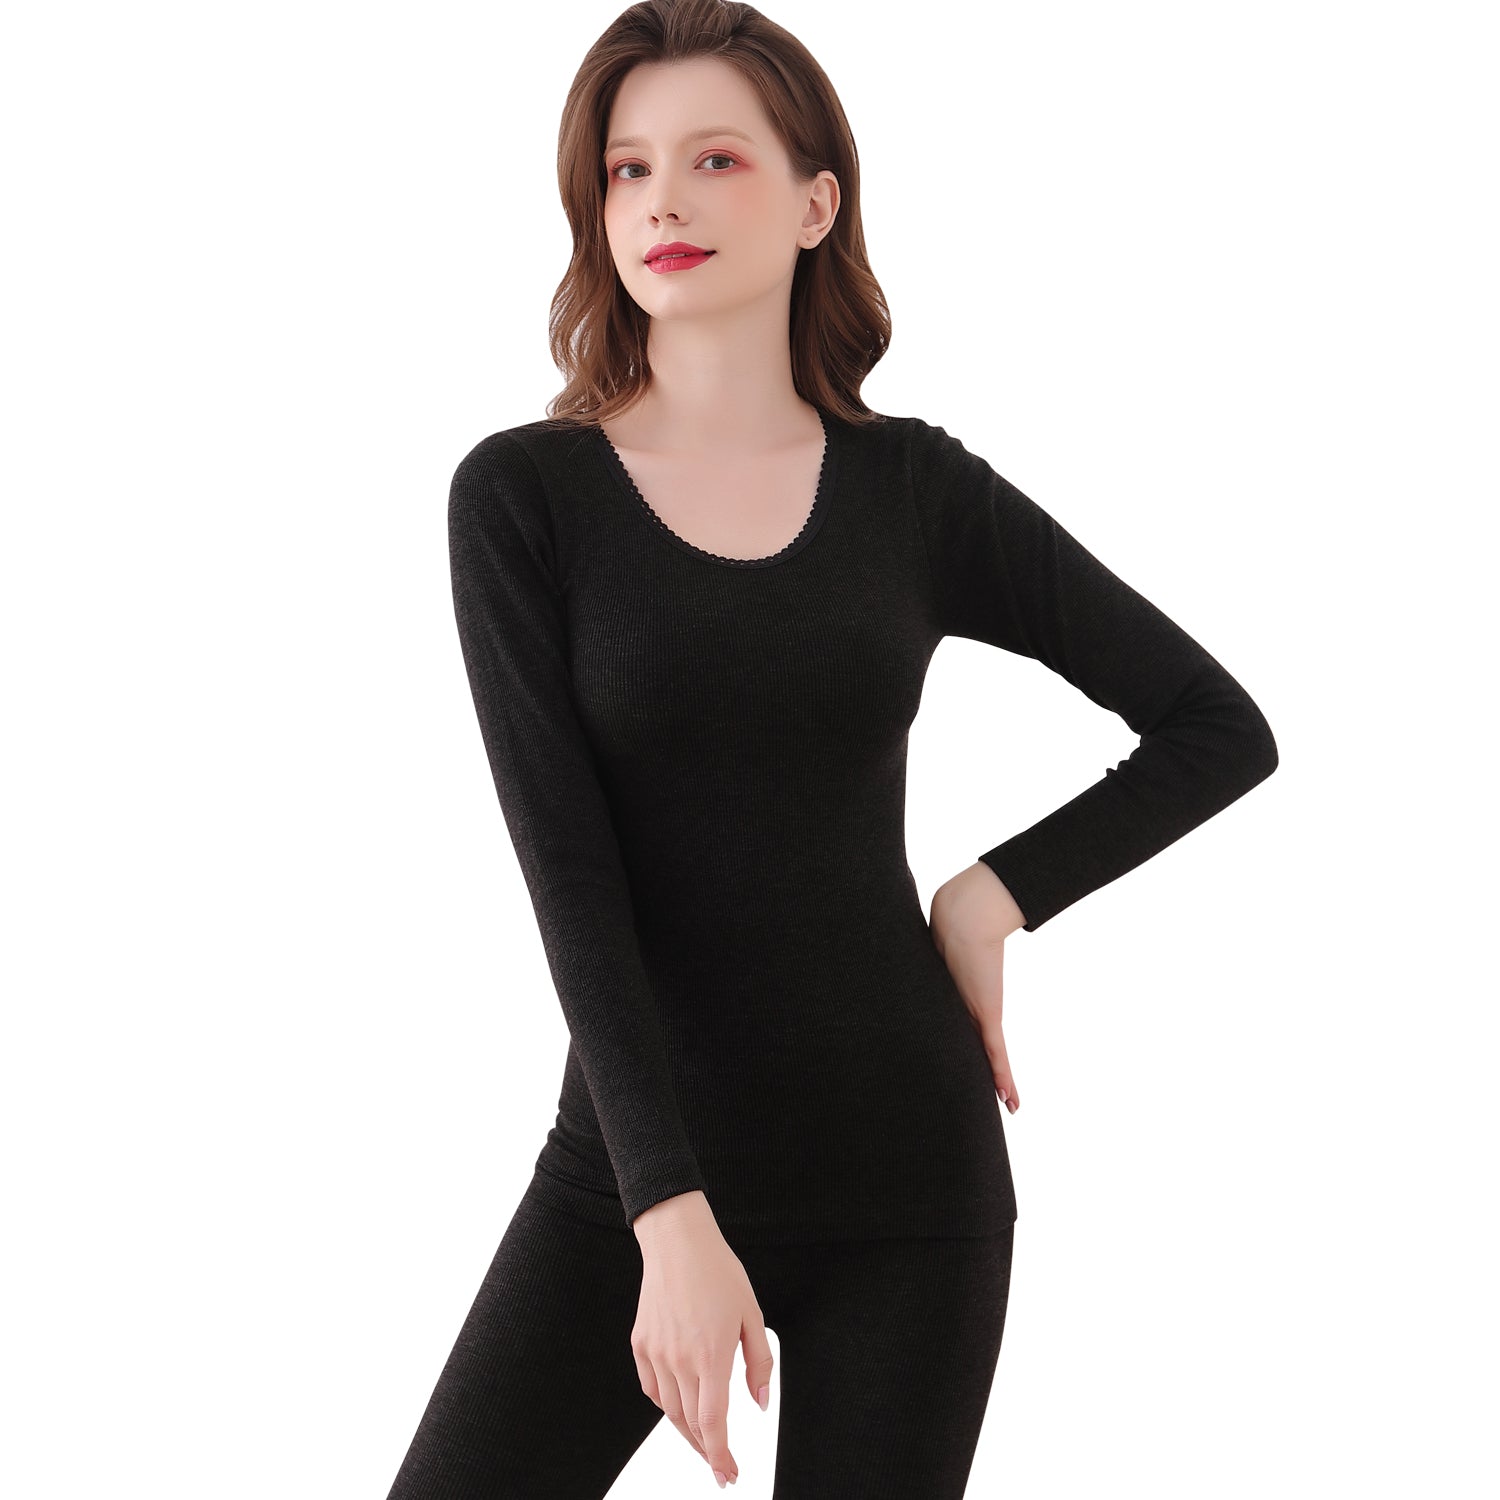 Sidiou Group Anniou Thermal Underwear Set for Women Wool Antibacterial Warm Underwear Long Johns Suit Soft Comfortable Long Sleeve Base Layer Thermal Top and Bottoms